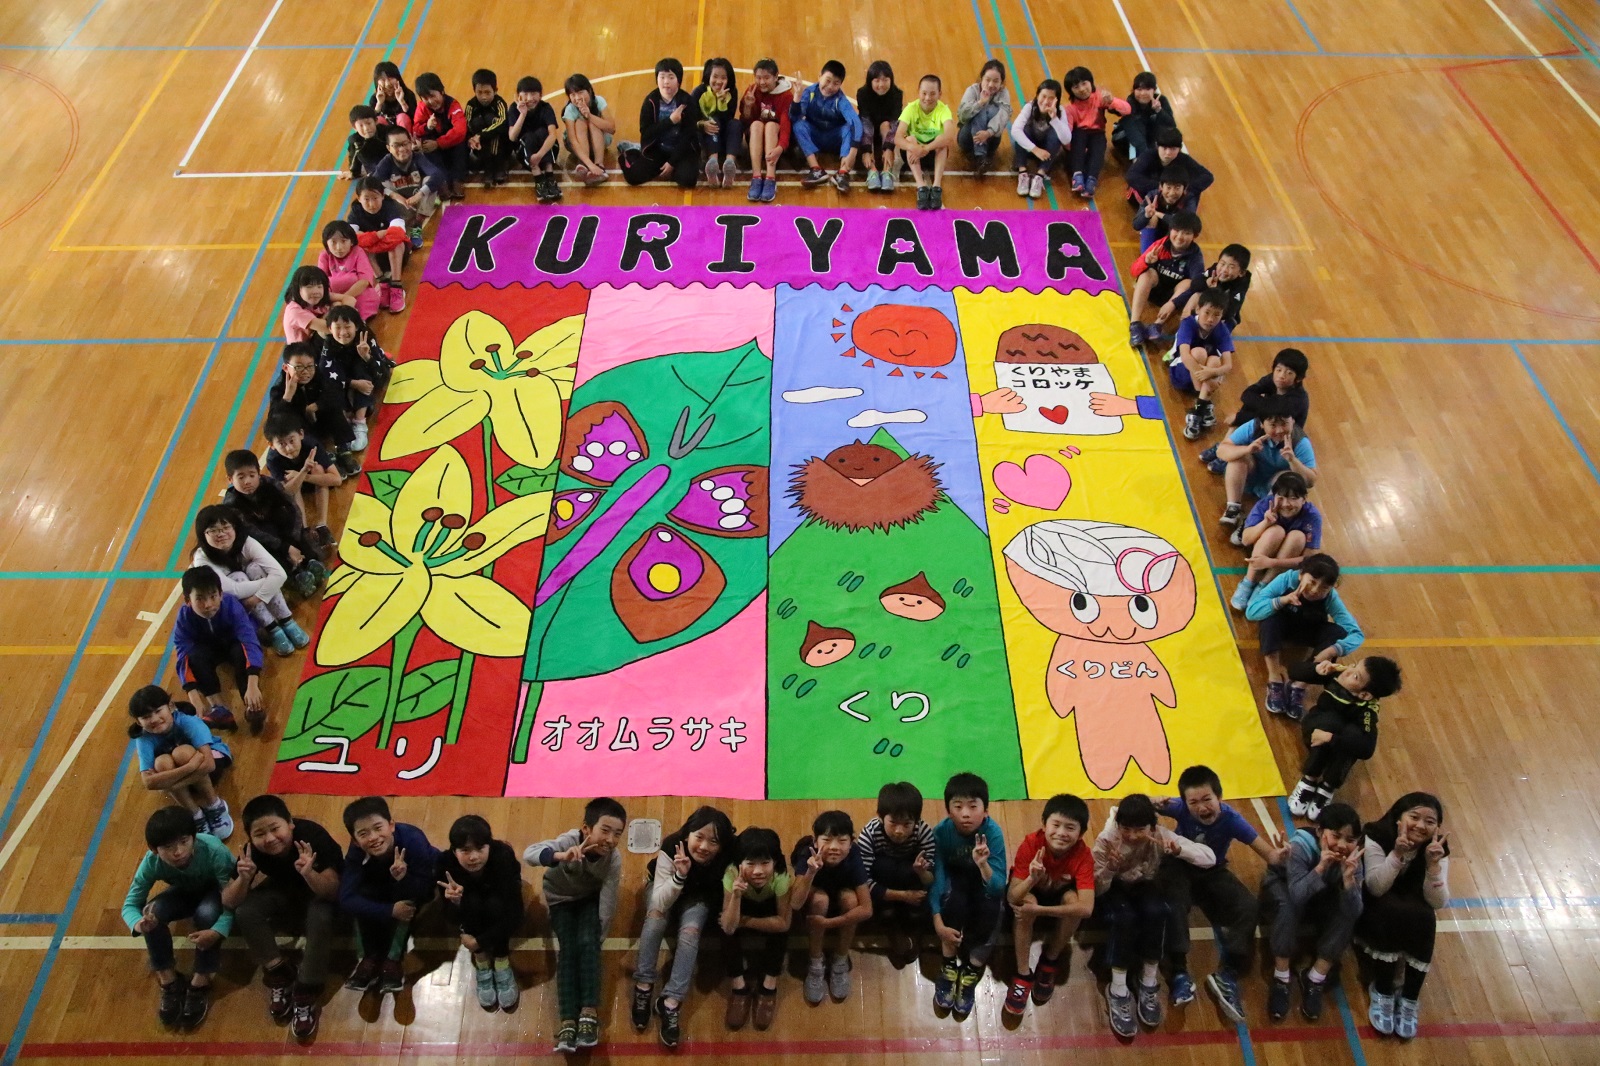 The Biggest Painting in the World 2020 Kuriyama town was completed